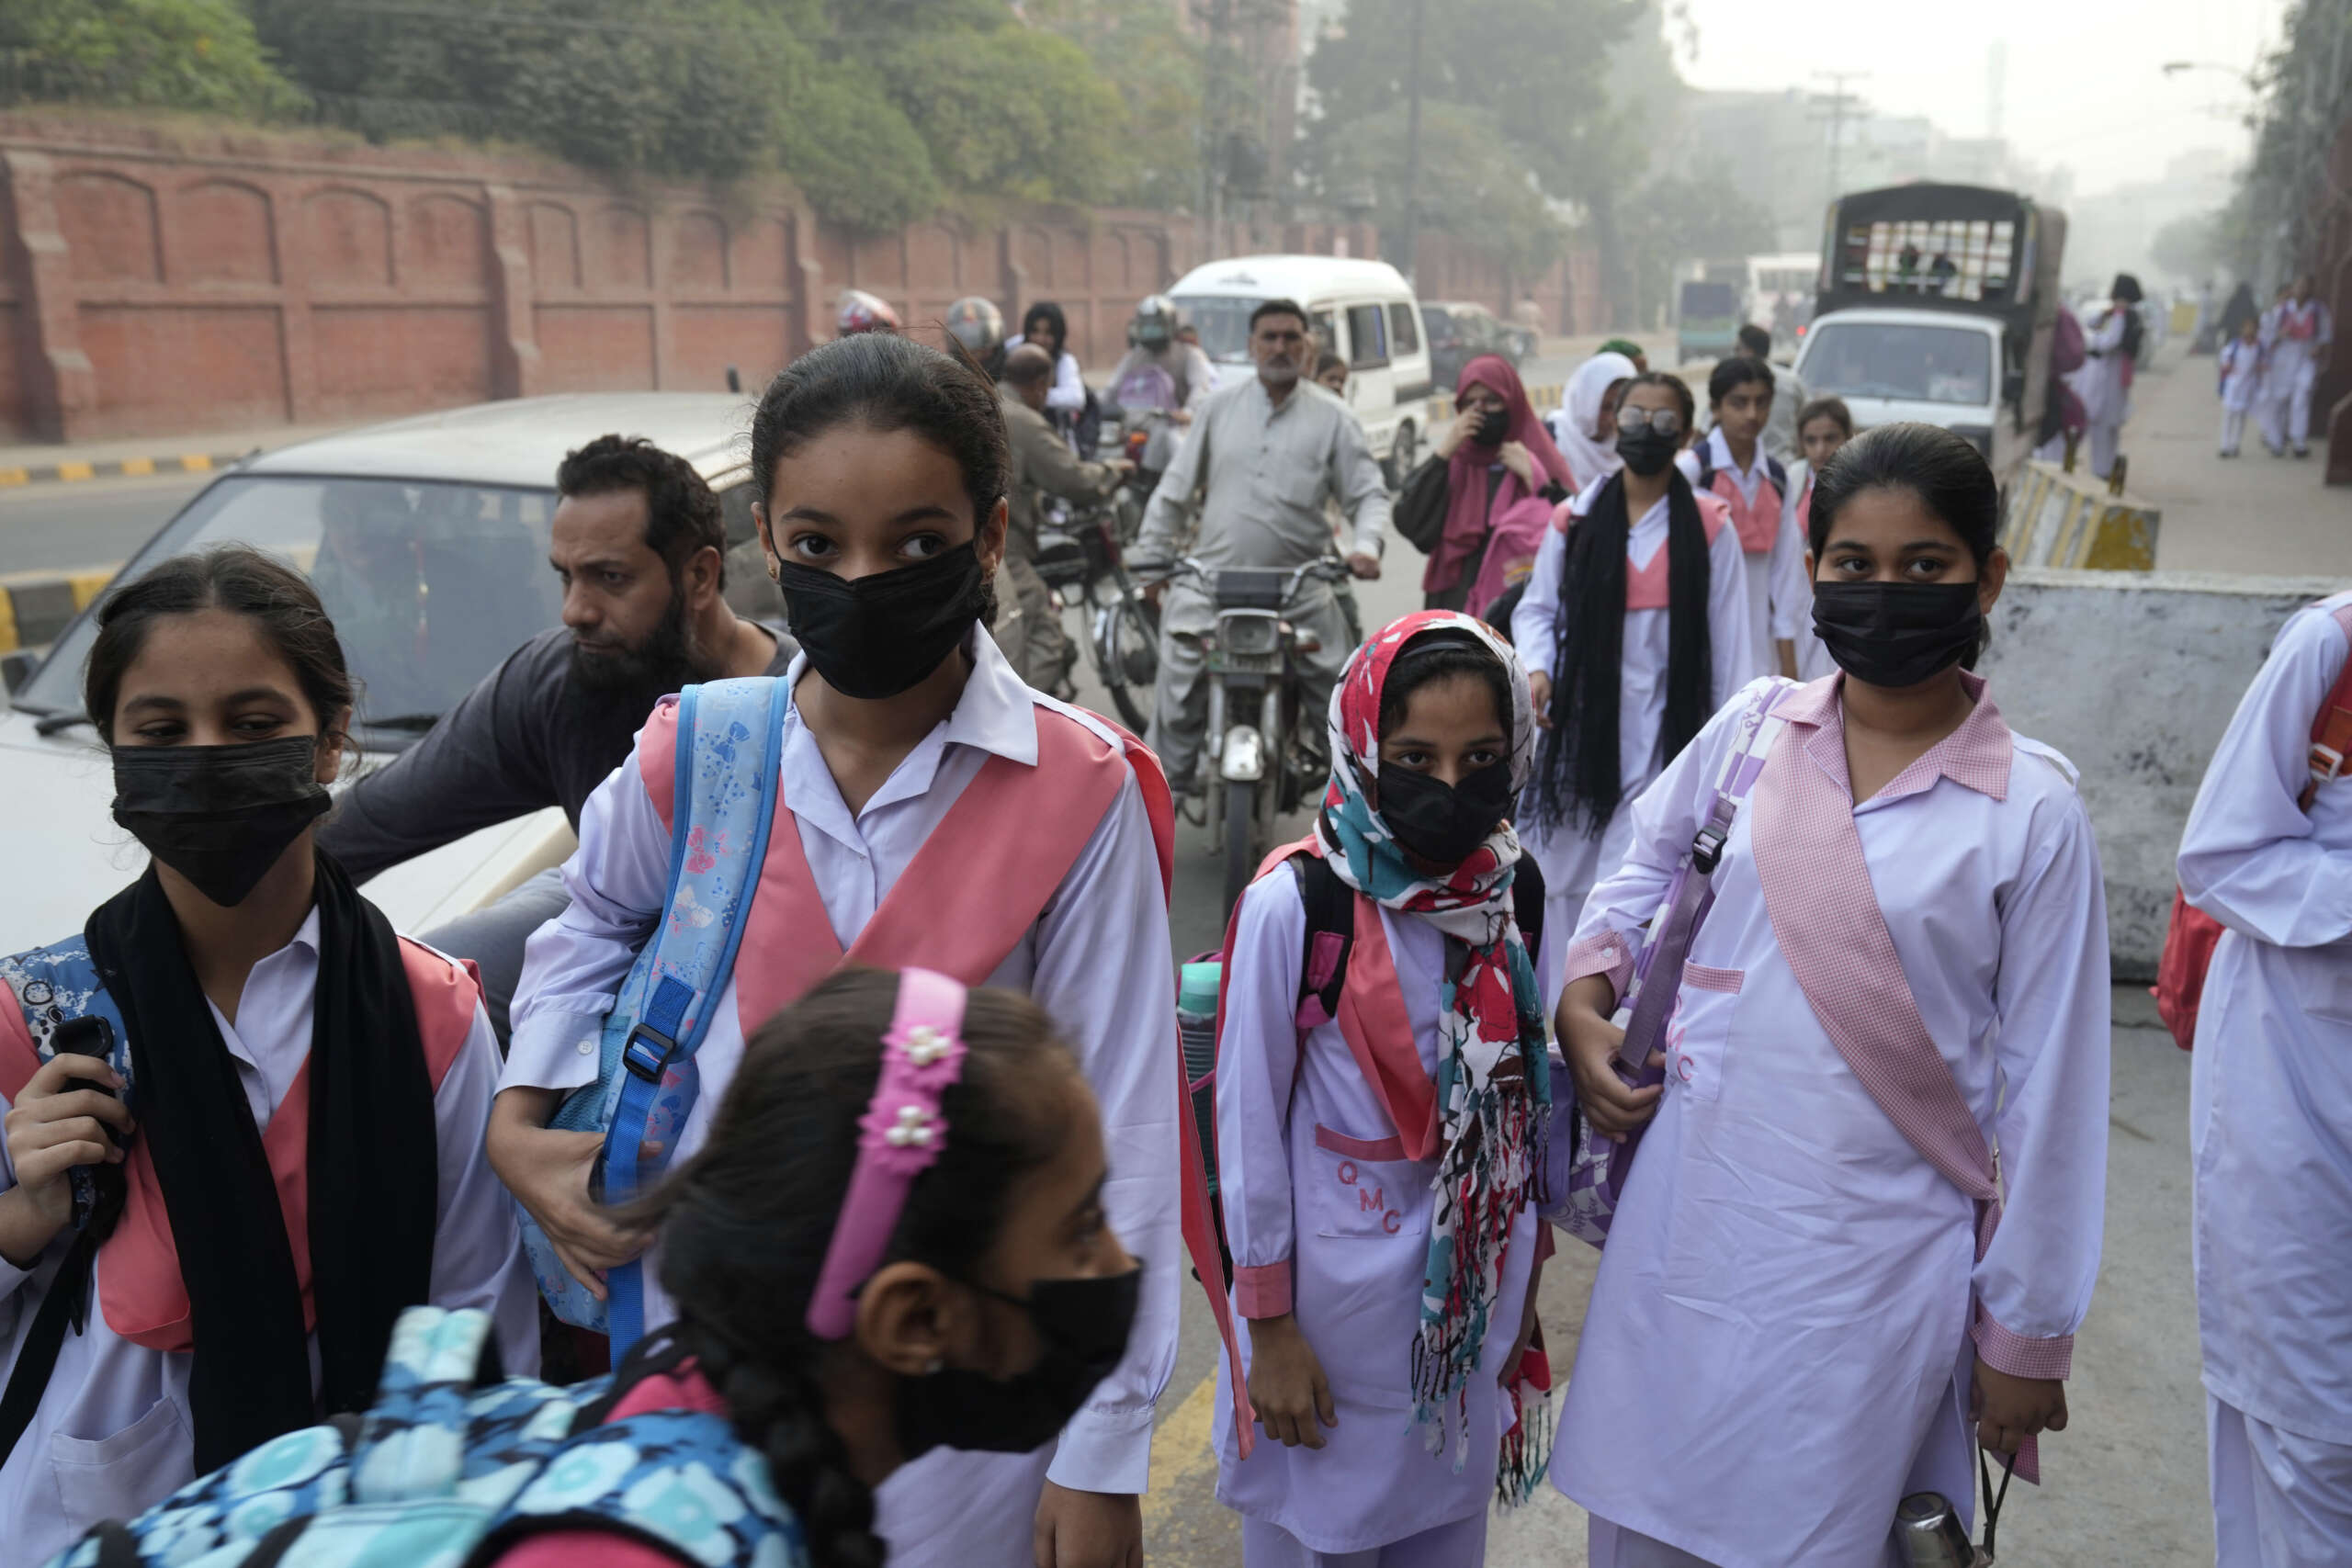 In Lahore, it’s that toxic, smoggy time of year again